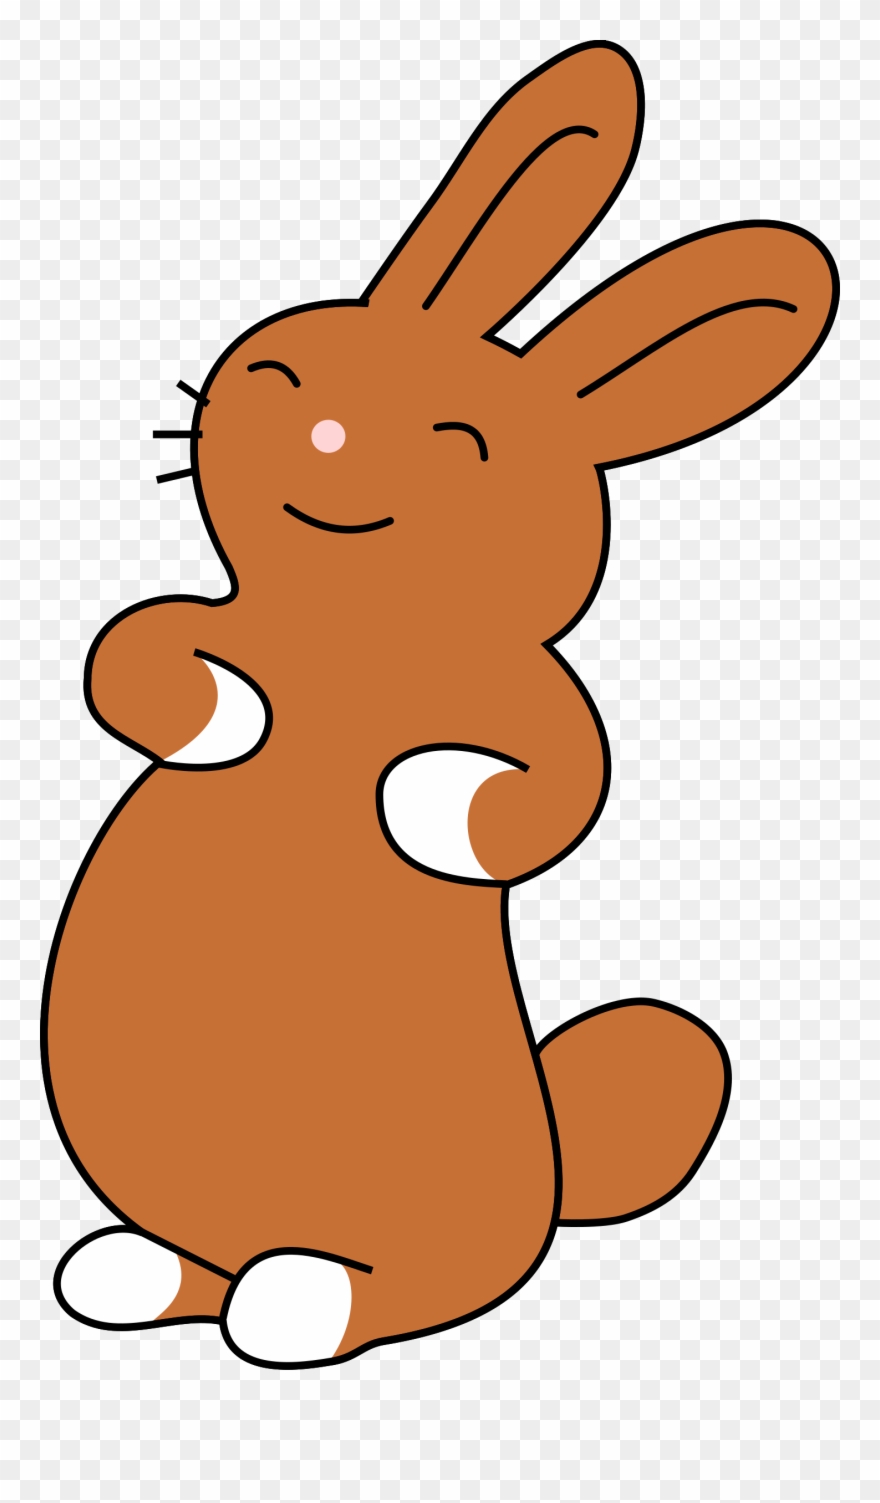 Clipart On Clip Art Easter Bunny And Cute Bunny Clipartix.